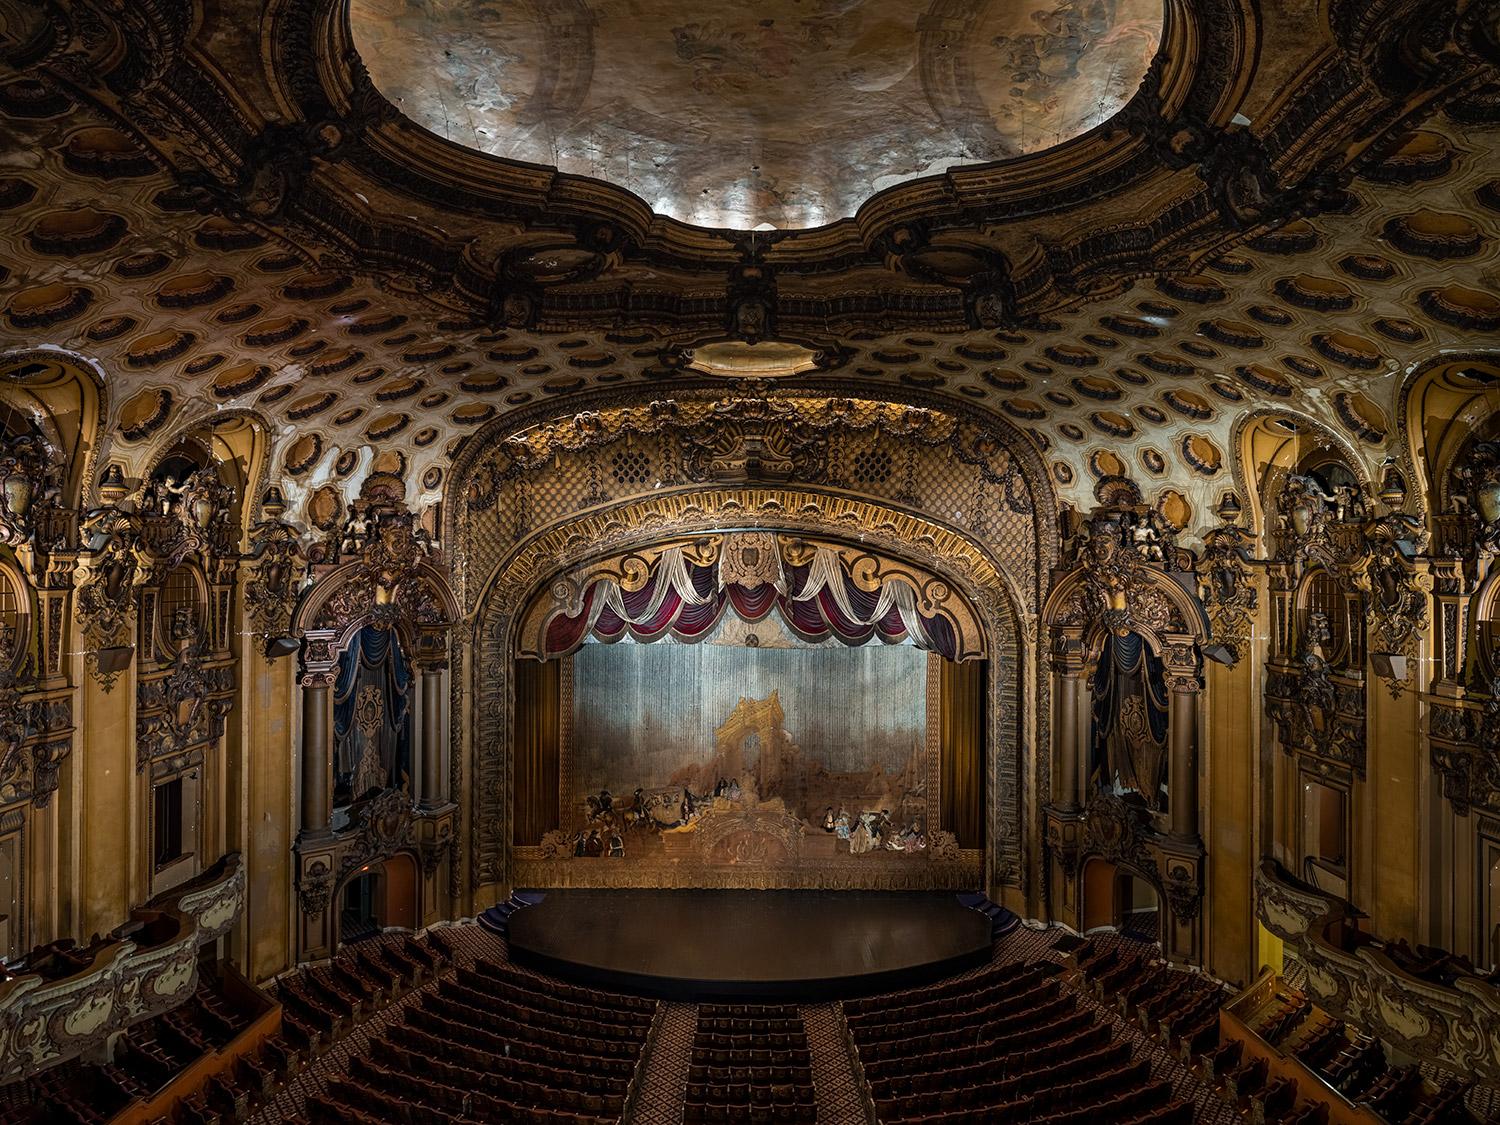 "The stunning Paramount Theatre in Oakland, California, is one of the best-preserved and last-remaining Art Deco cinema palaces in the nation. Built in the early 1930s before the throes of the Great Depression, the Paramount served its community by